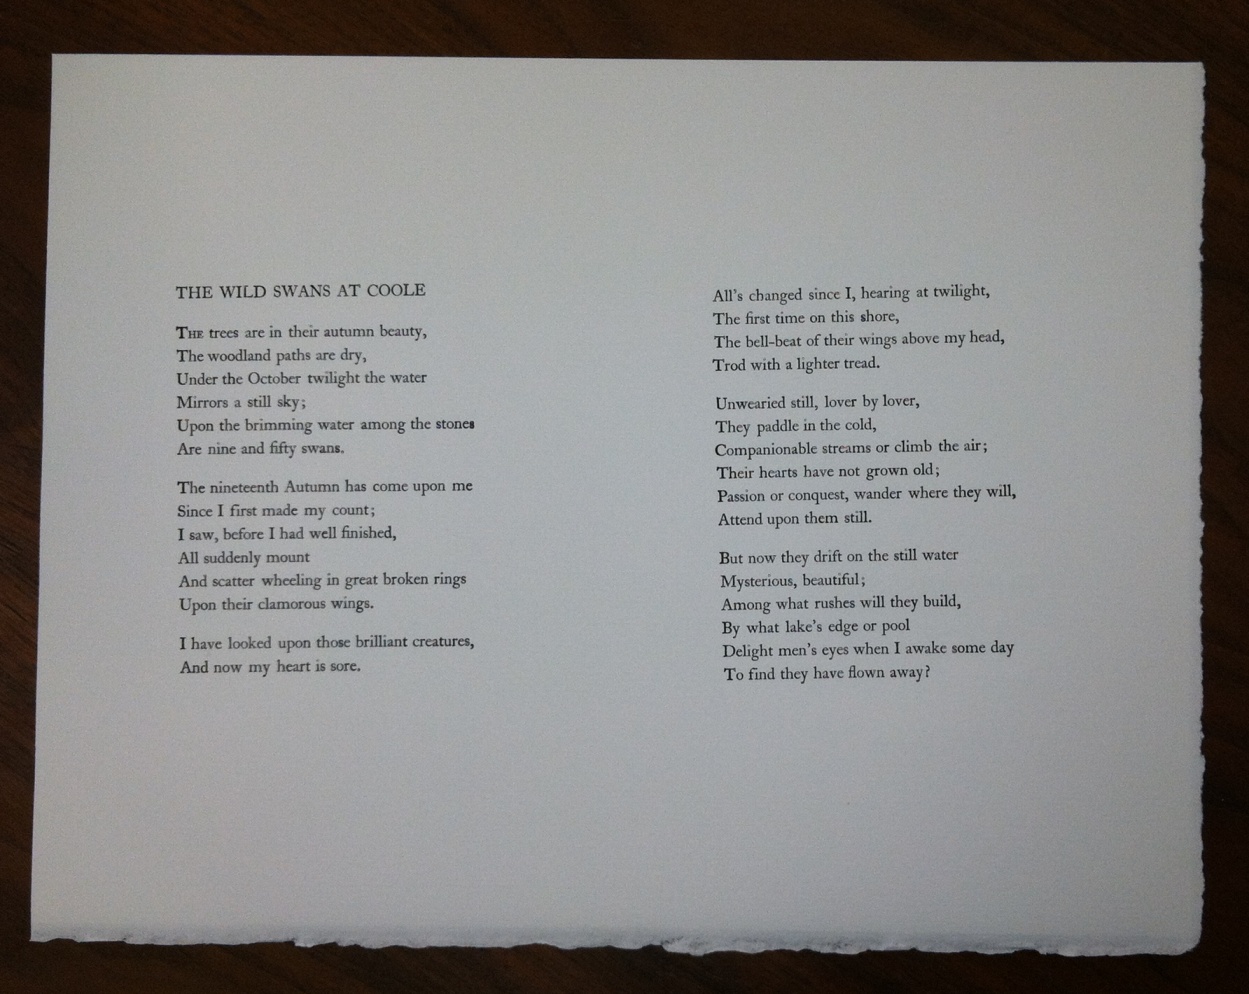 Image of the printed text of the poem "The Image of the printed text of Yeats's poem, "The Wild Swans at Coole."  